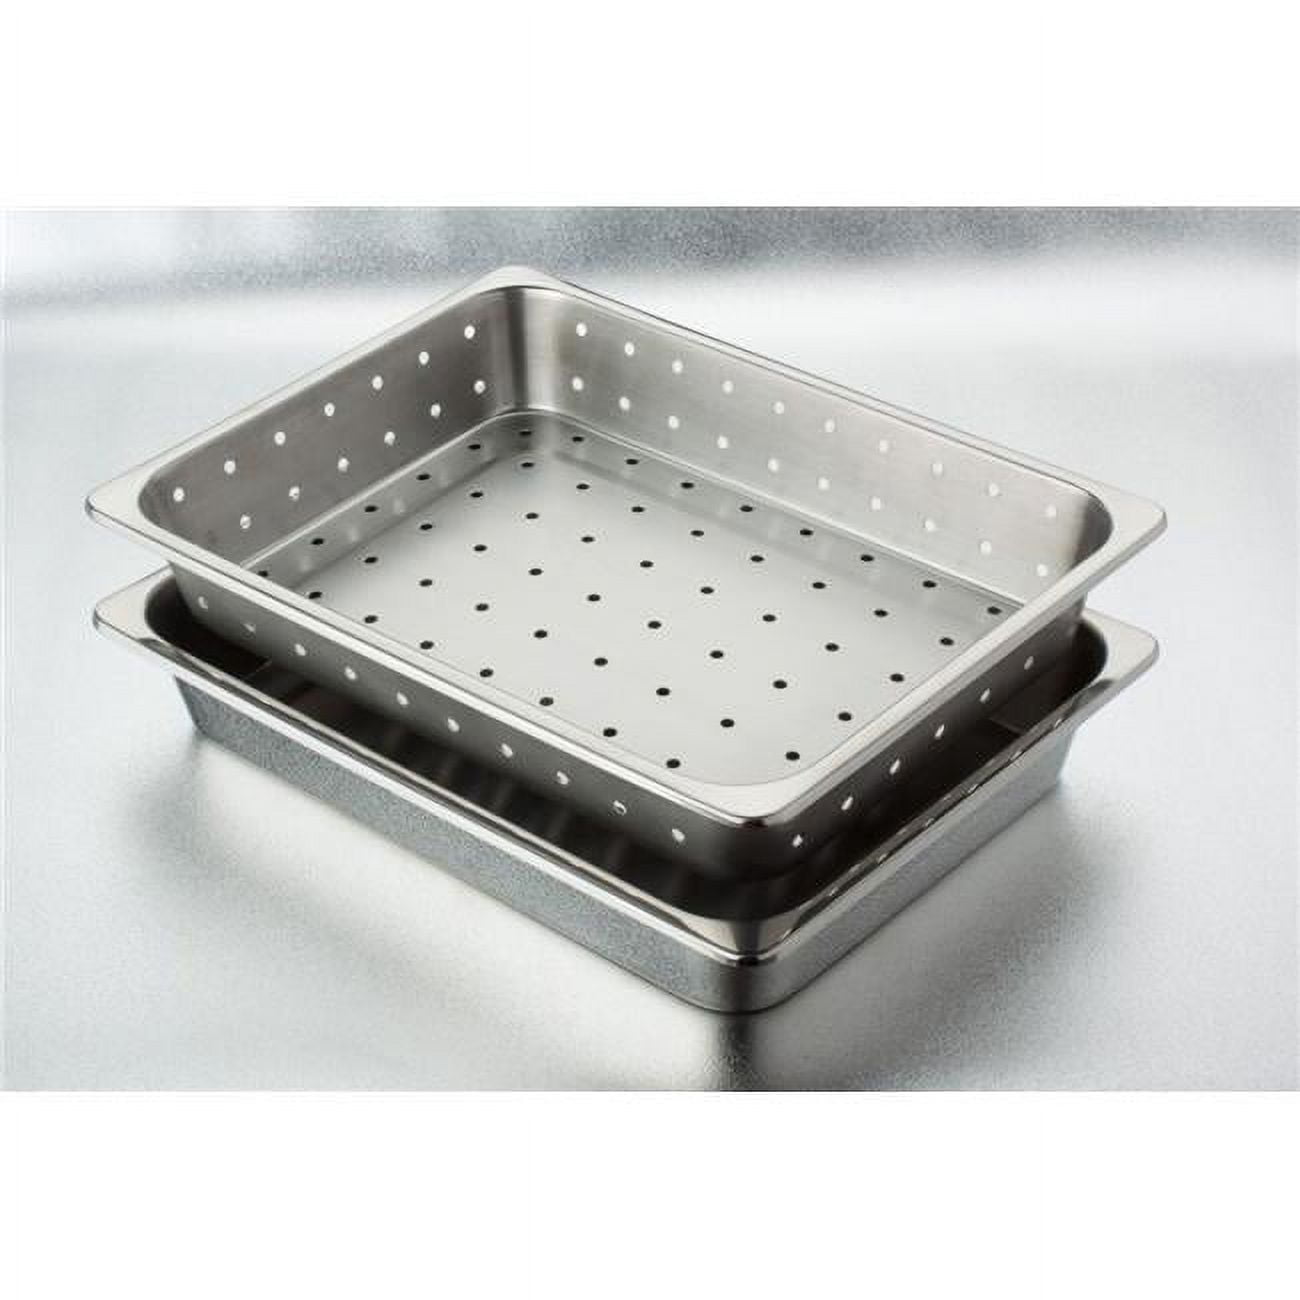 4276p Stainless Steel Perforated Insert Tray